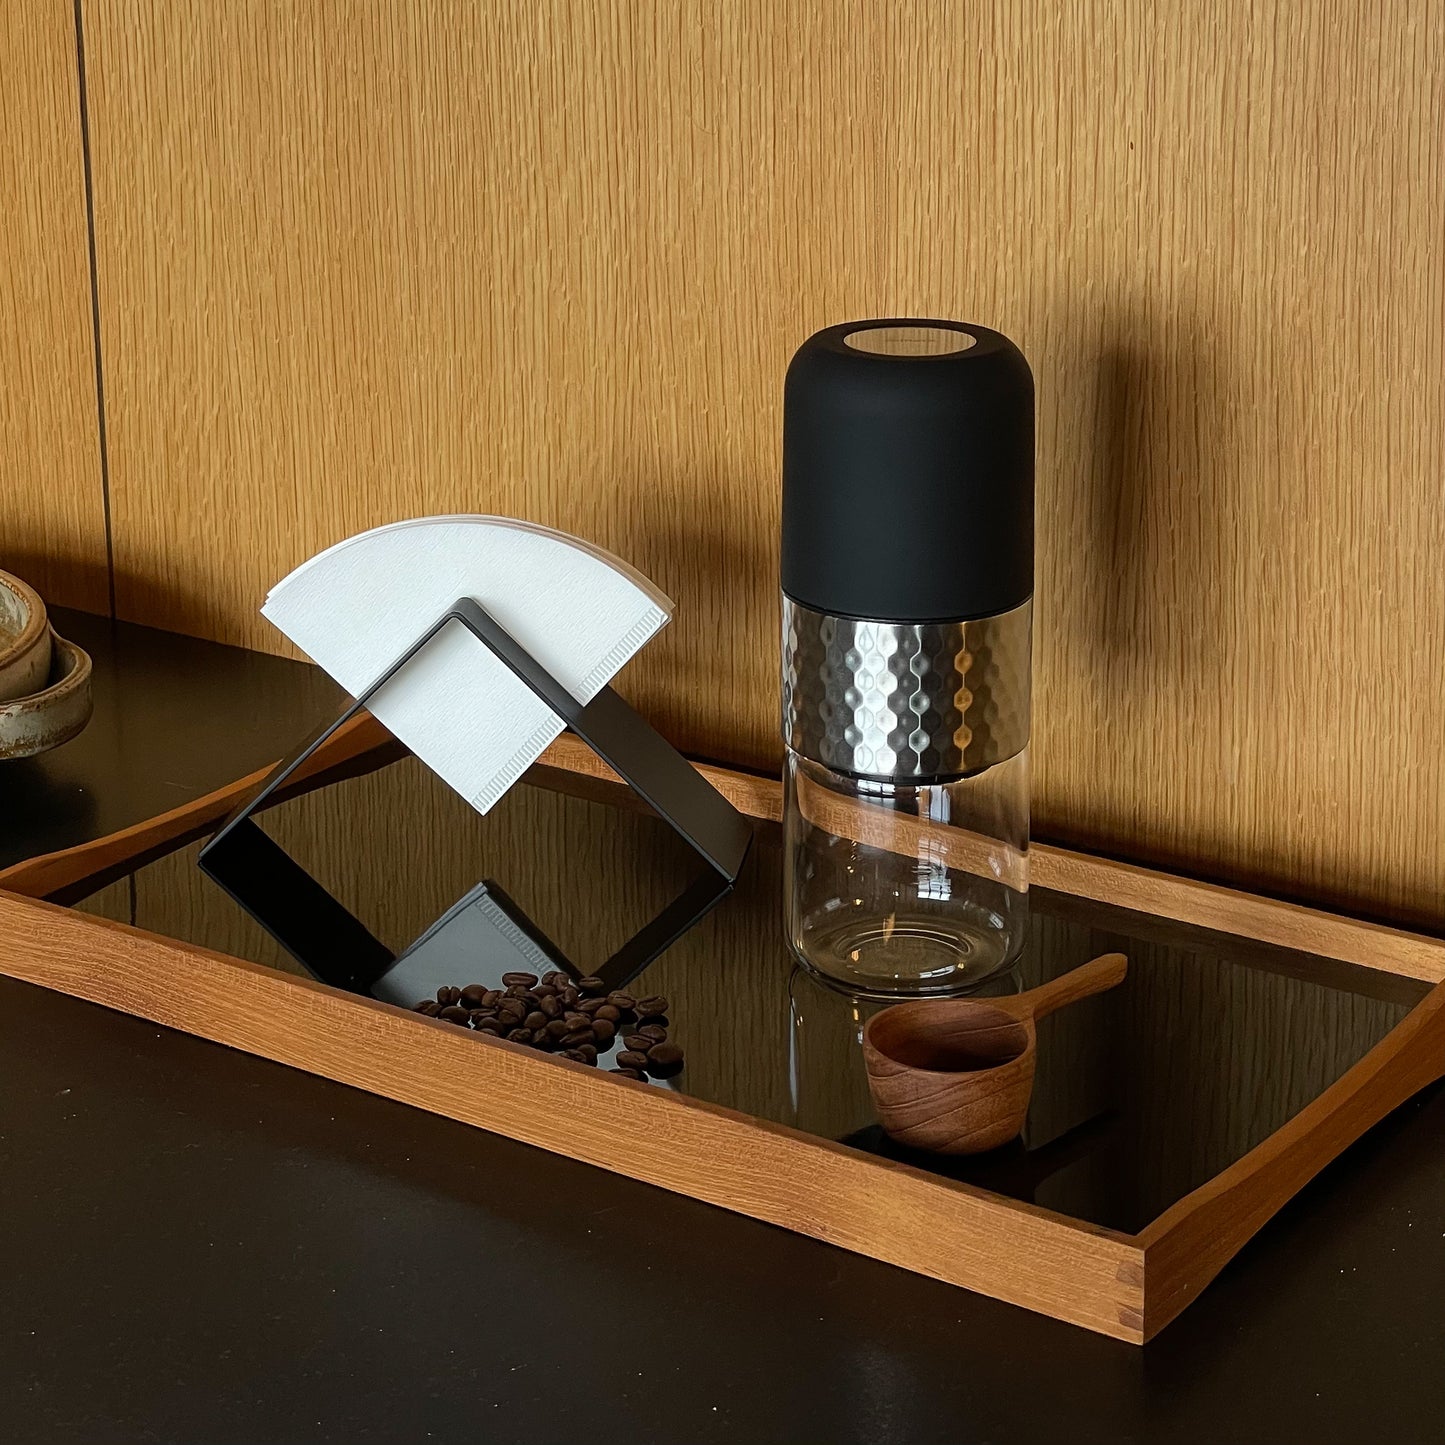 Electric Coffee Grinder - Conical Burr